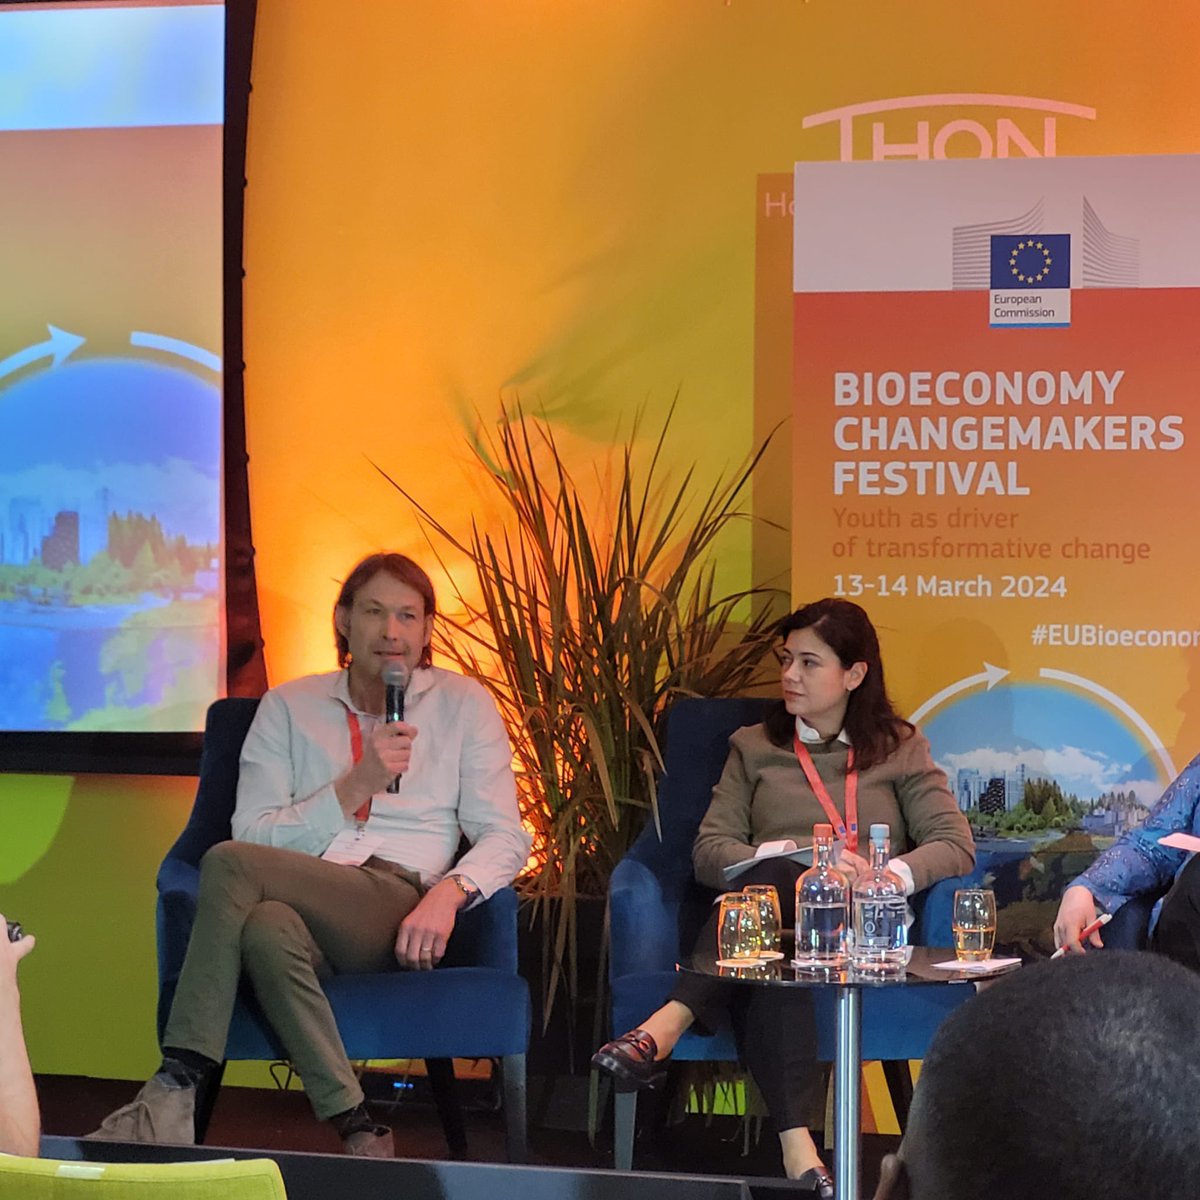 BIC Chair Rob Beekers at the Bioeconomy Changemakers Festival speaking about the collaboration of different stakeholders, including the public & private sectors “working together to establish viable ecosystems for making #biobased products”